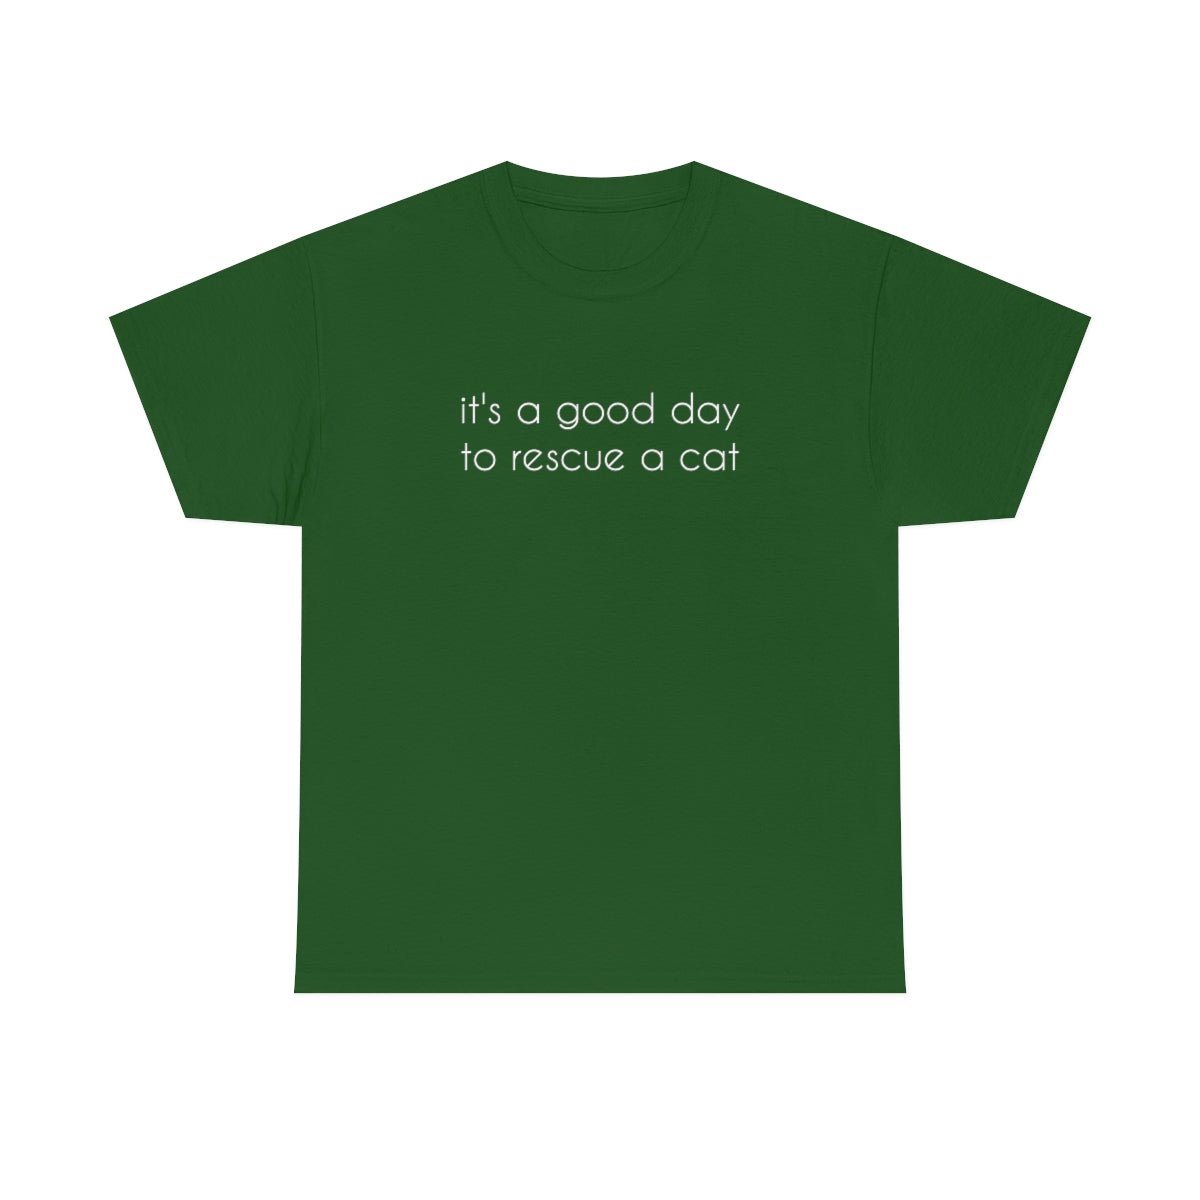 It's A Good Day To Rescue A Cat | Text Tees - Detezi Designs-22435437500164245872